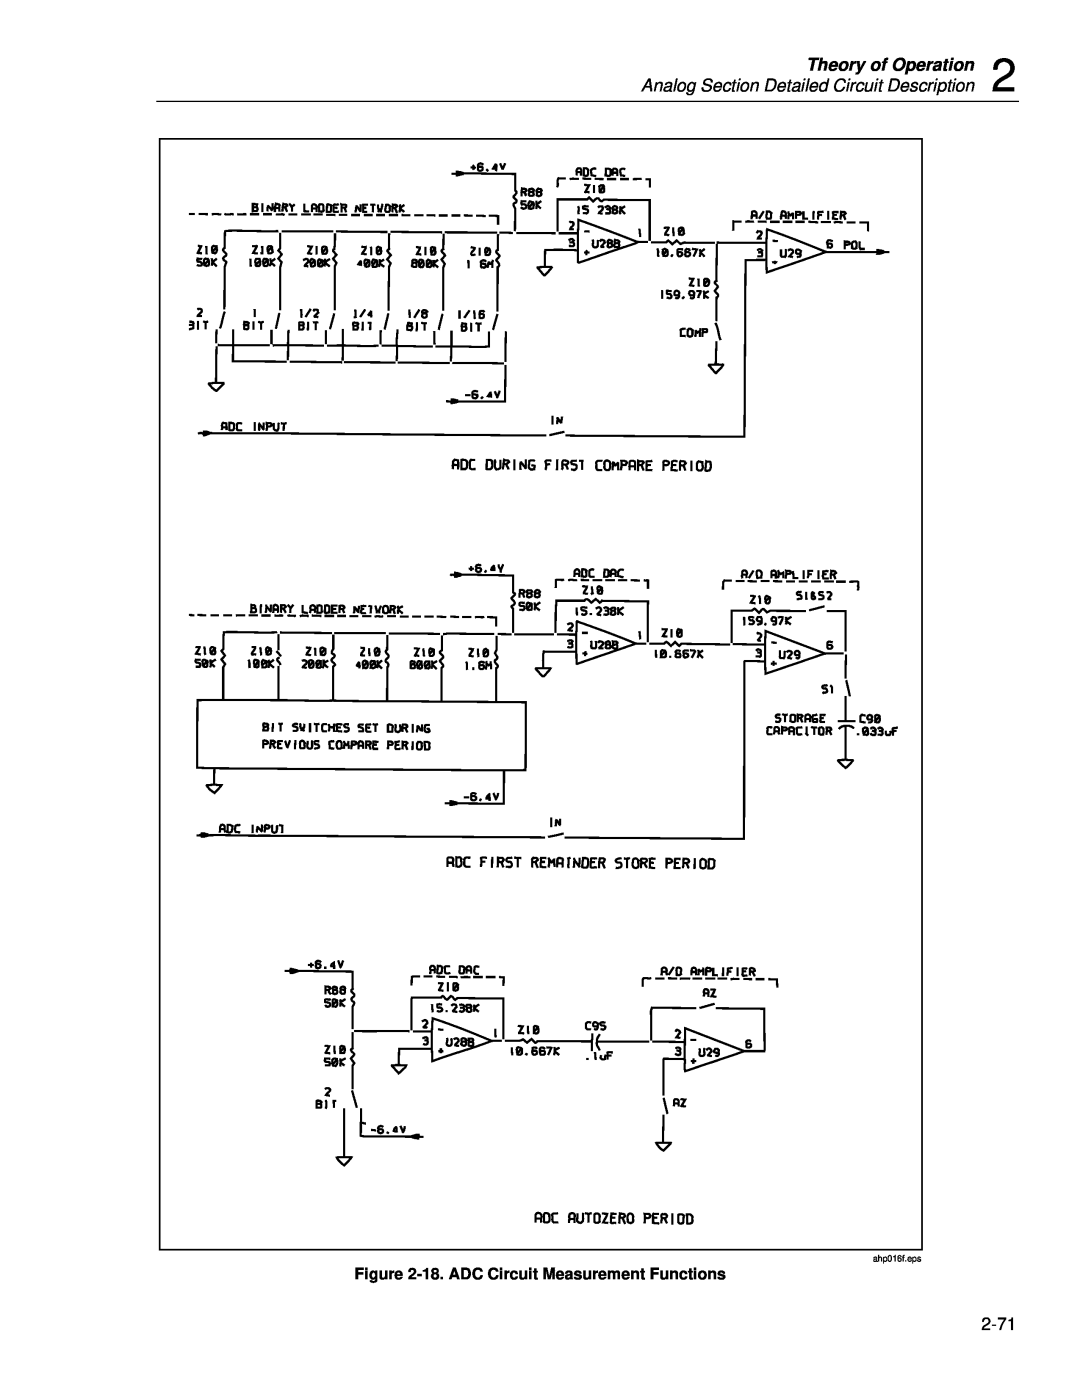 Fluke 5720A Theory of Operation, Analog Section Detailed Circuit Description, 18. ADC Circuit Measurement Functions 